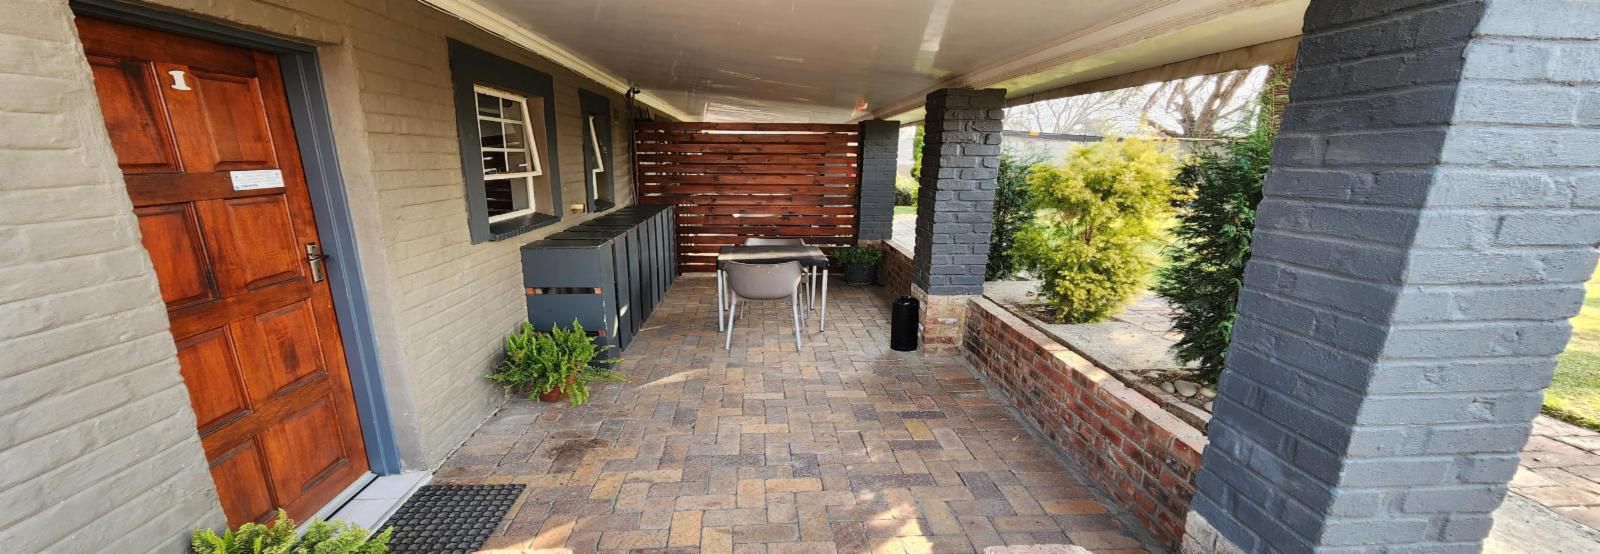 Bo Kamer Guesthouse Ermelo Mpumalanga South Africa House, Building, Architecture, Brick Texture, Texture, Garden, Nature, Plant, Living Room